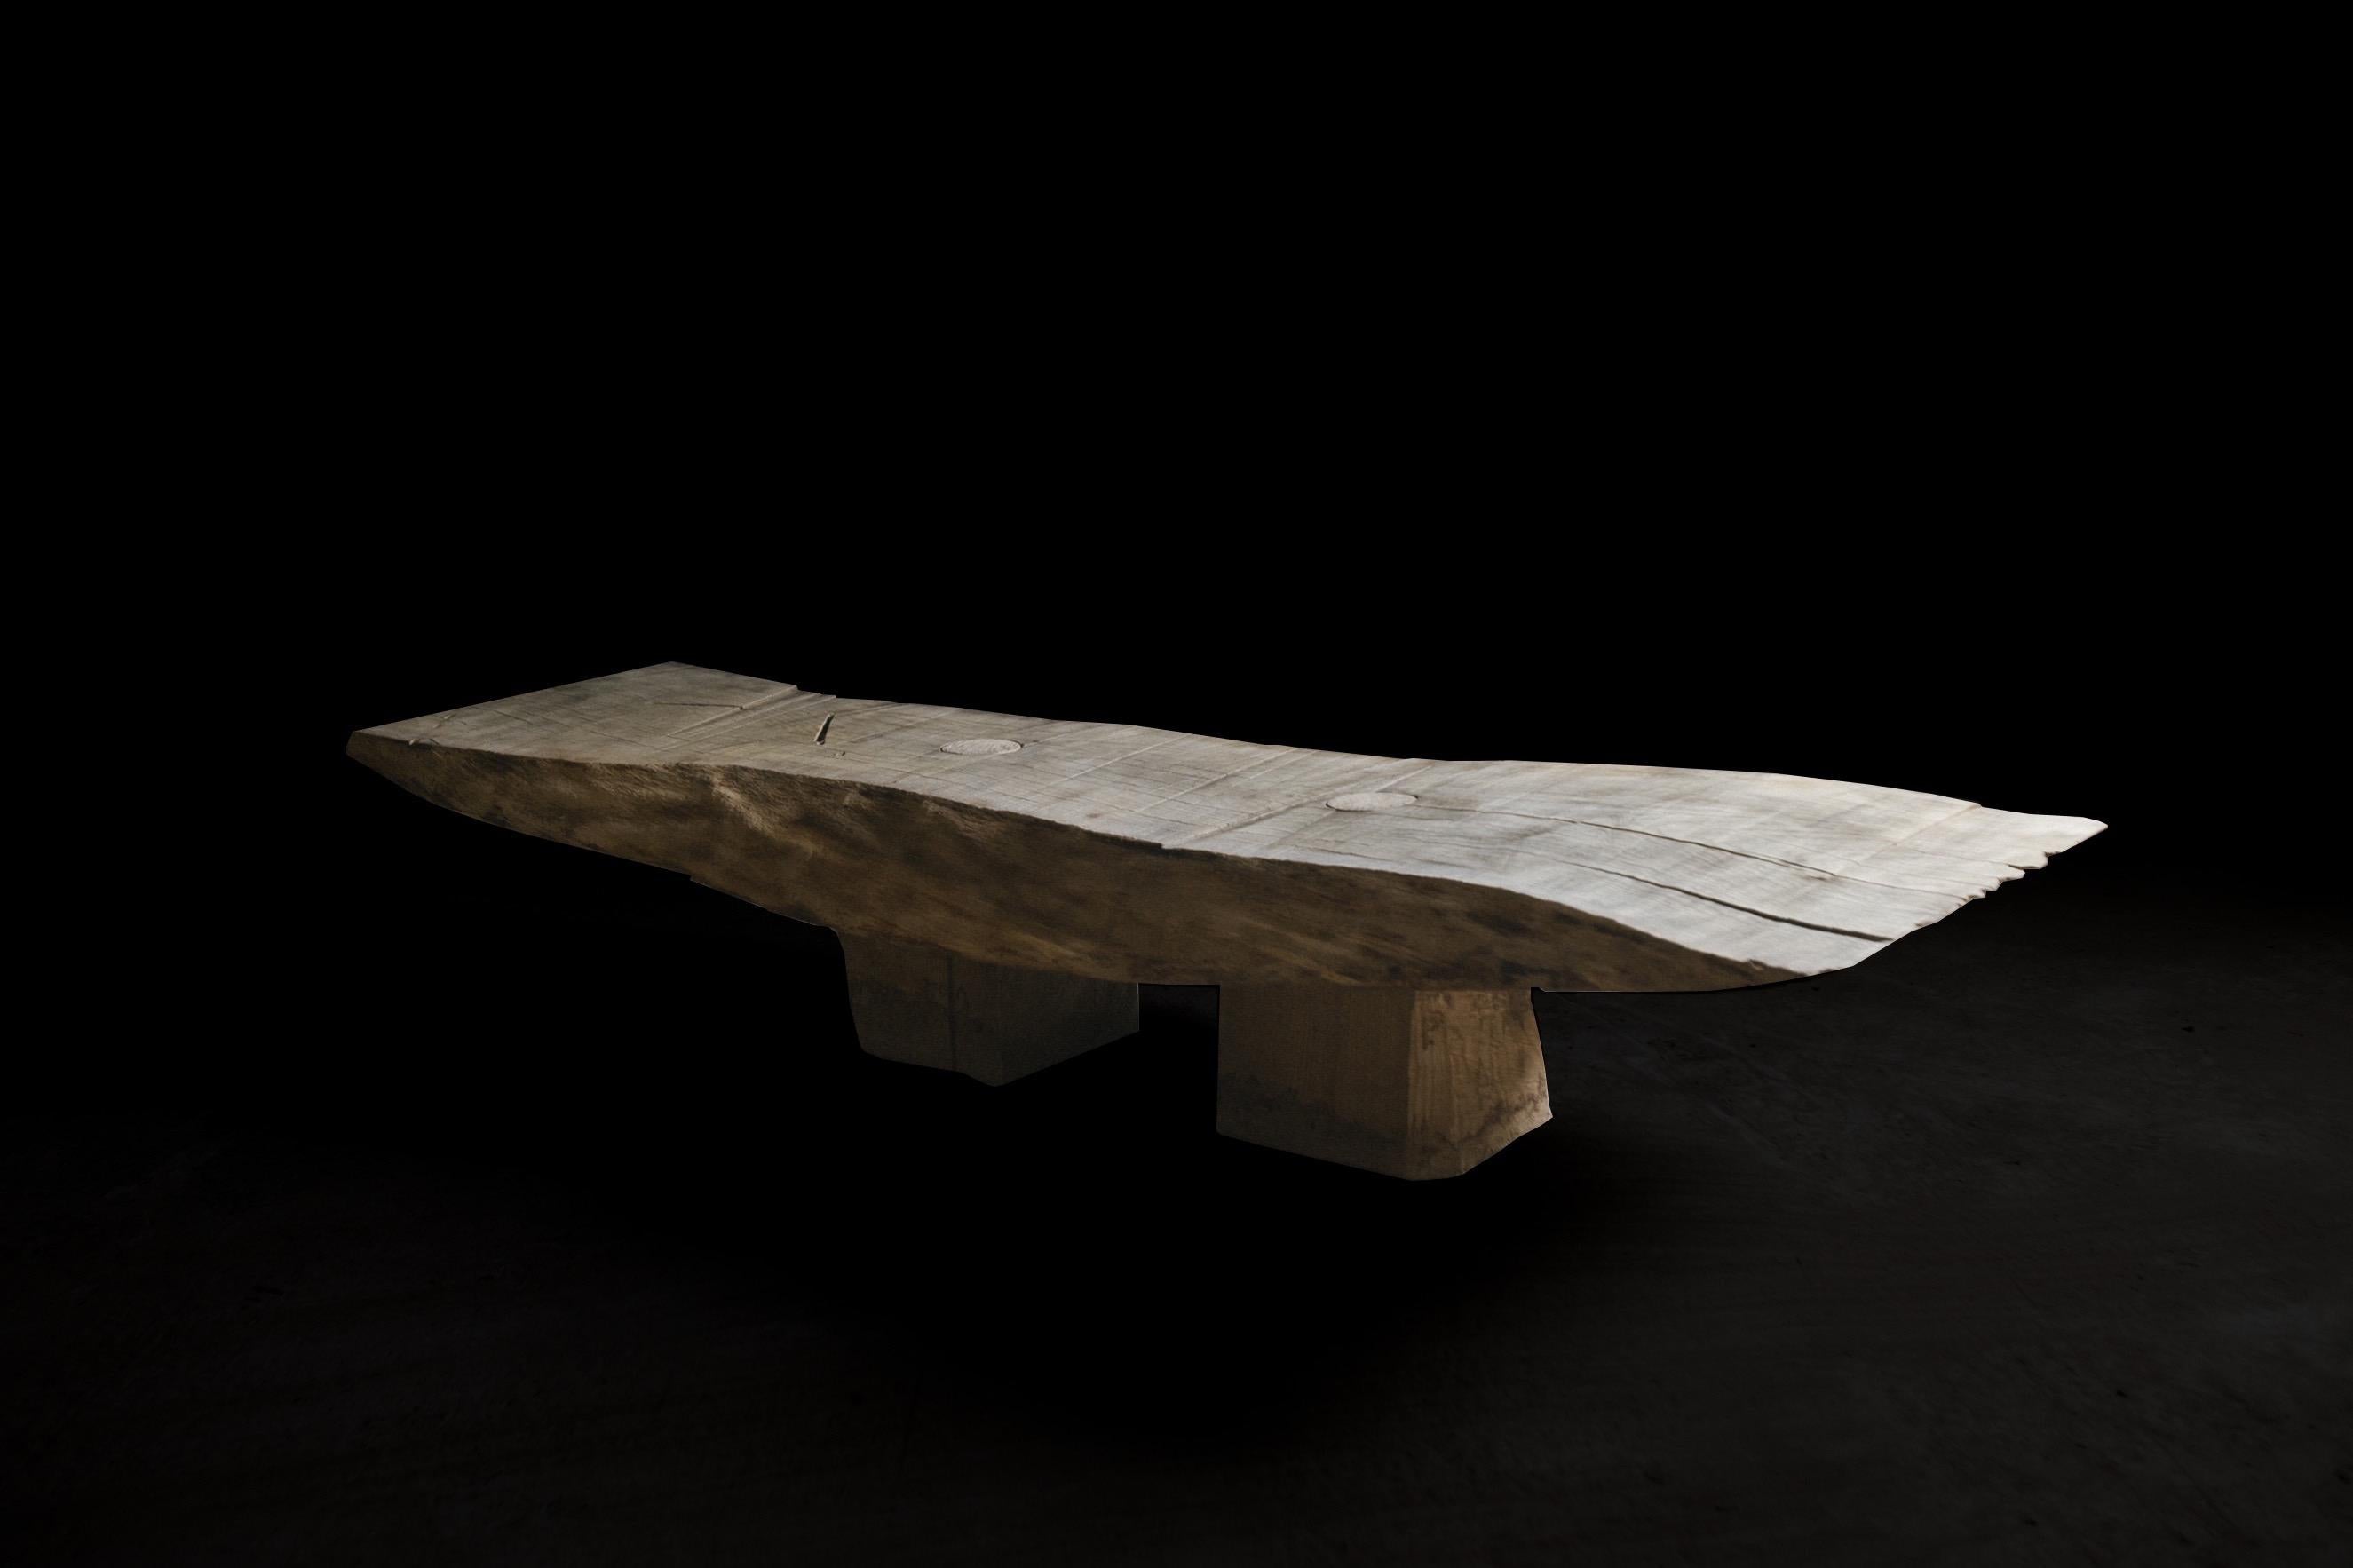 Bench or low table made of solid oak (+ linseed oil)
(Outdoor use OK)
Measures: 35 x 250 x 60 cm

Warm furniture’s made by Russian designer Denis Milovanov from 